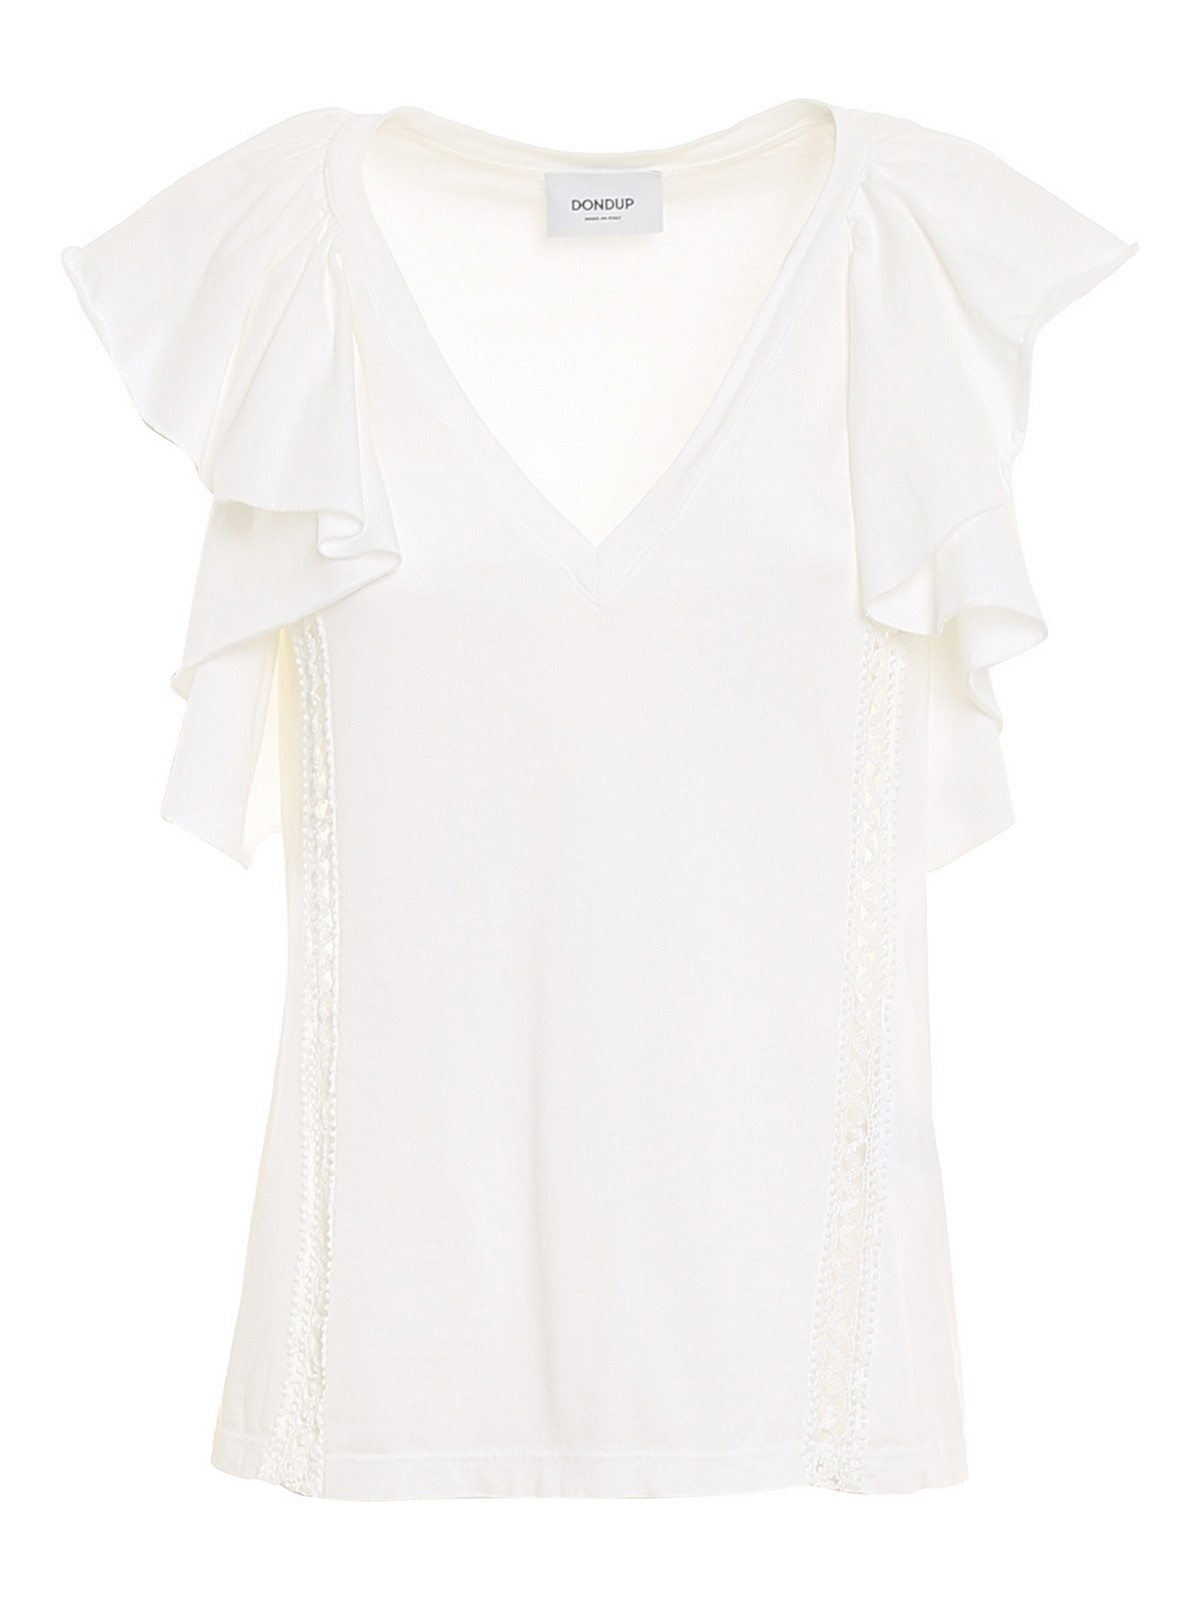 Dondup Cotton Jersey Top In White